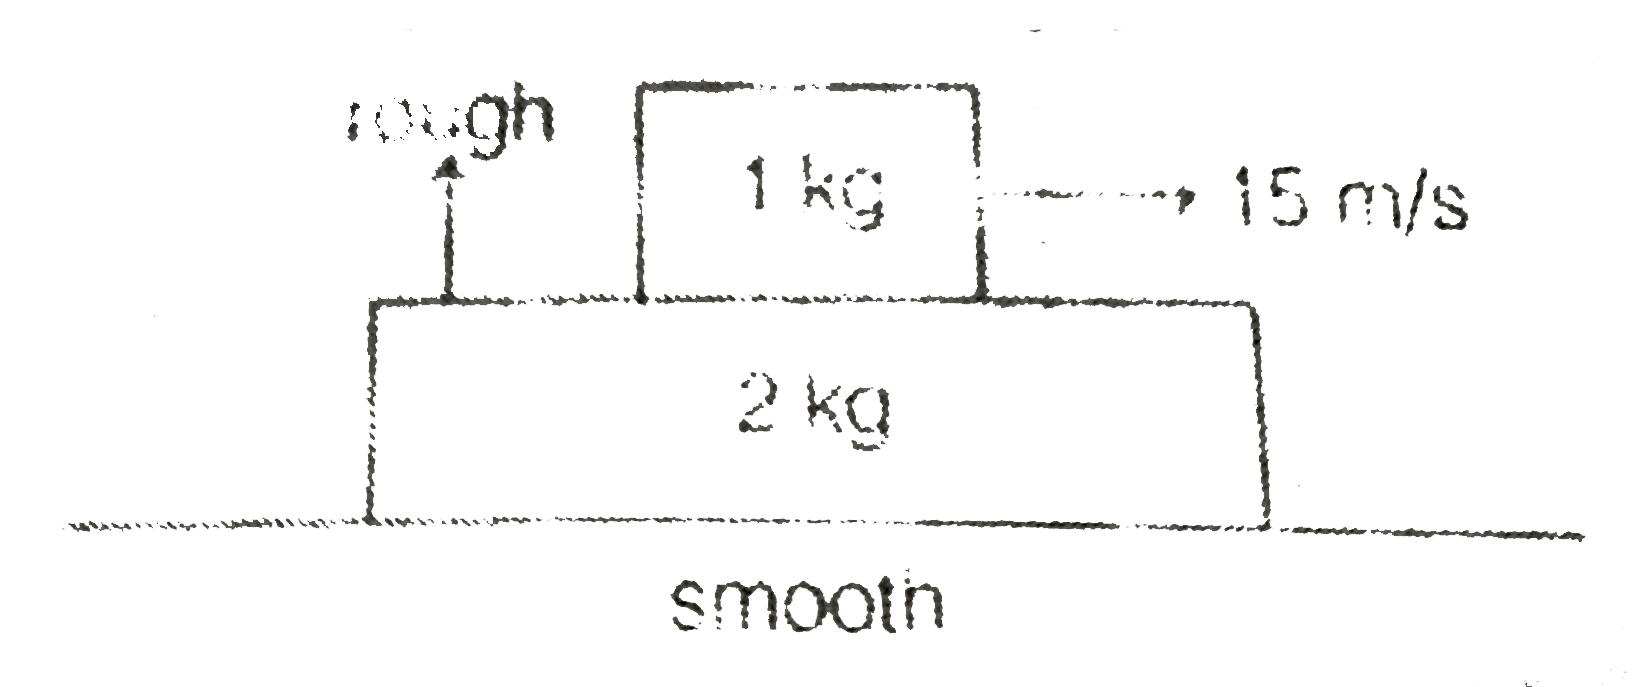 A 1 kg block is given a velocity of 15 m/s towards right over a very long rough plank of mass 2 kg as shown in figure.     If coefficient of friction between the two blocks is equal to 0.4, then magnitude of initial slope of P(1) versus and P(2) versus t (in SI unit) will be